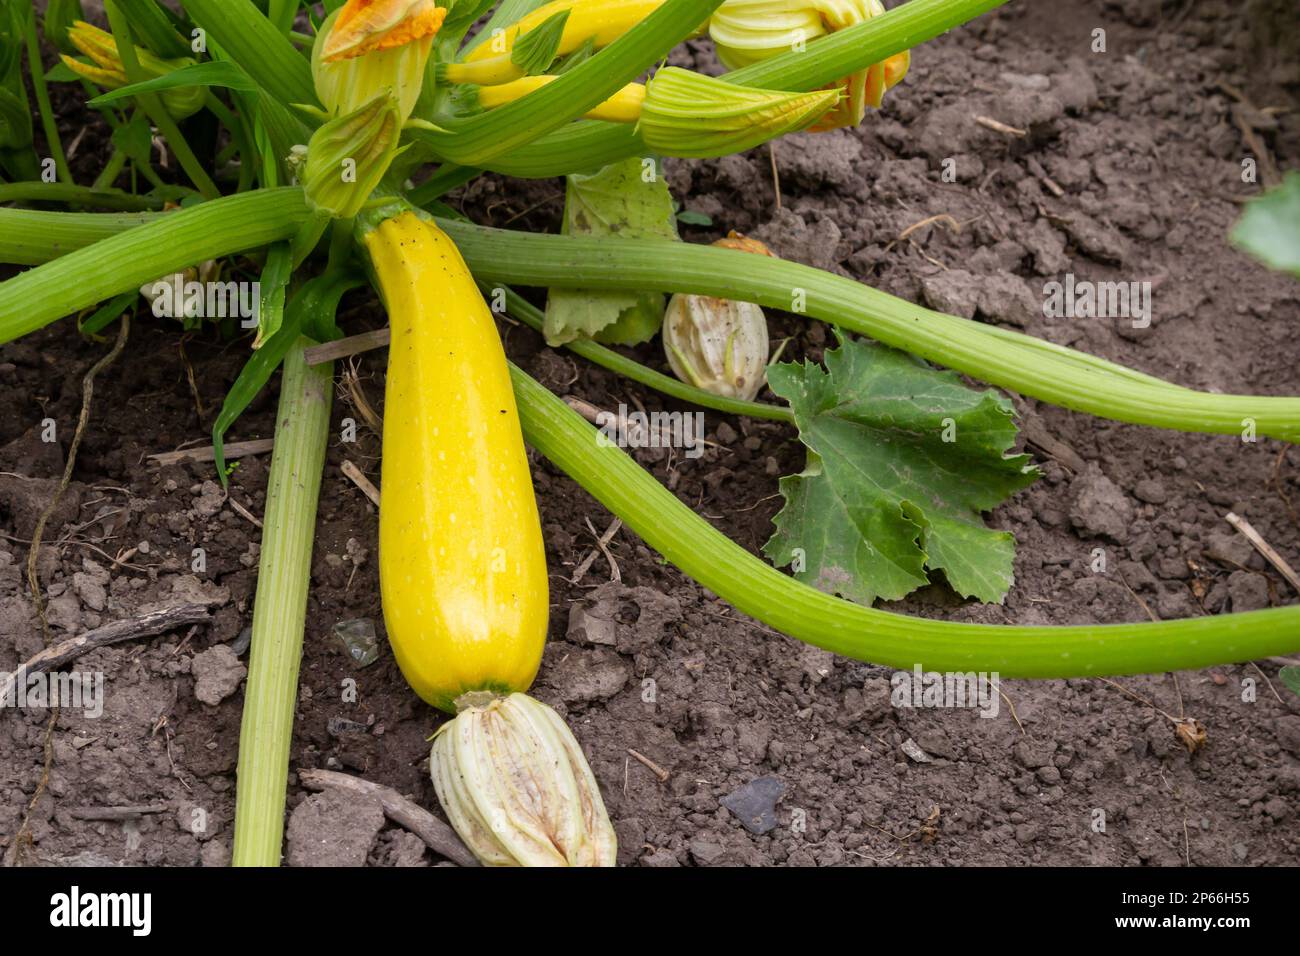 Zucchini plant. Zucchini with flower and fruit in field. Green vegetable marrow growing on bush. Courgettes blossoms. Stock Photo